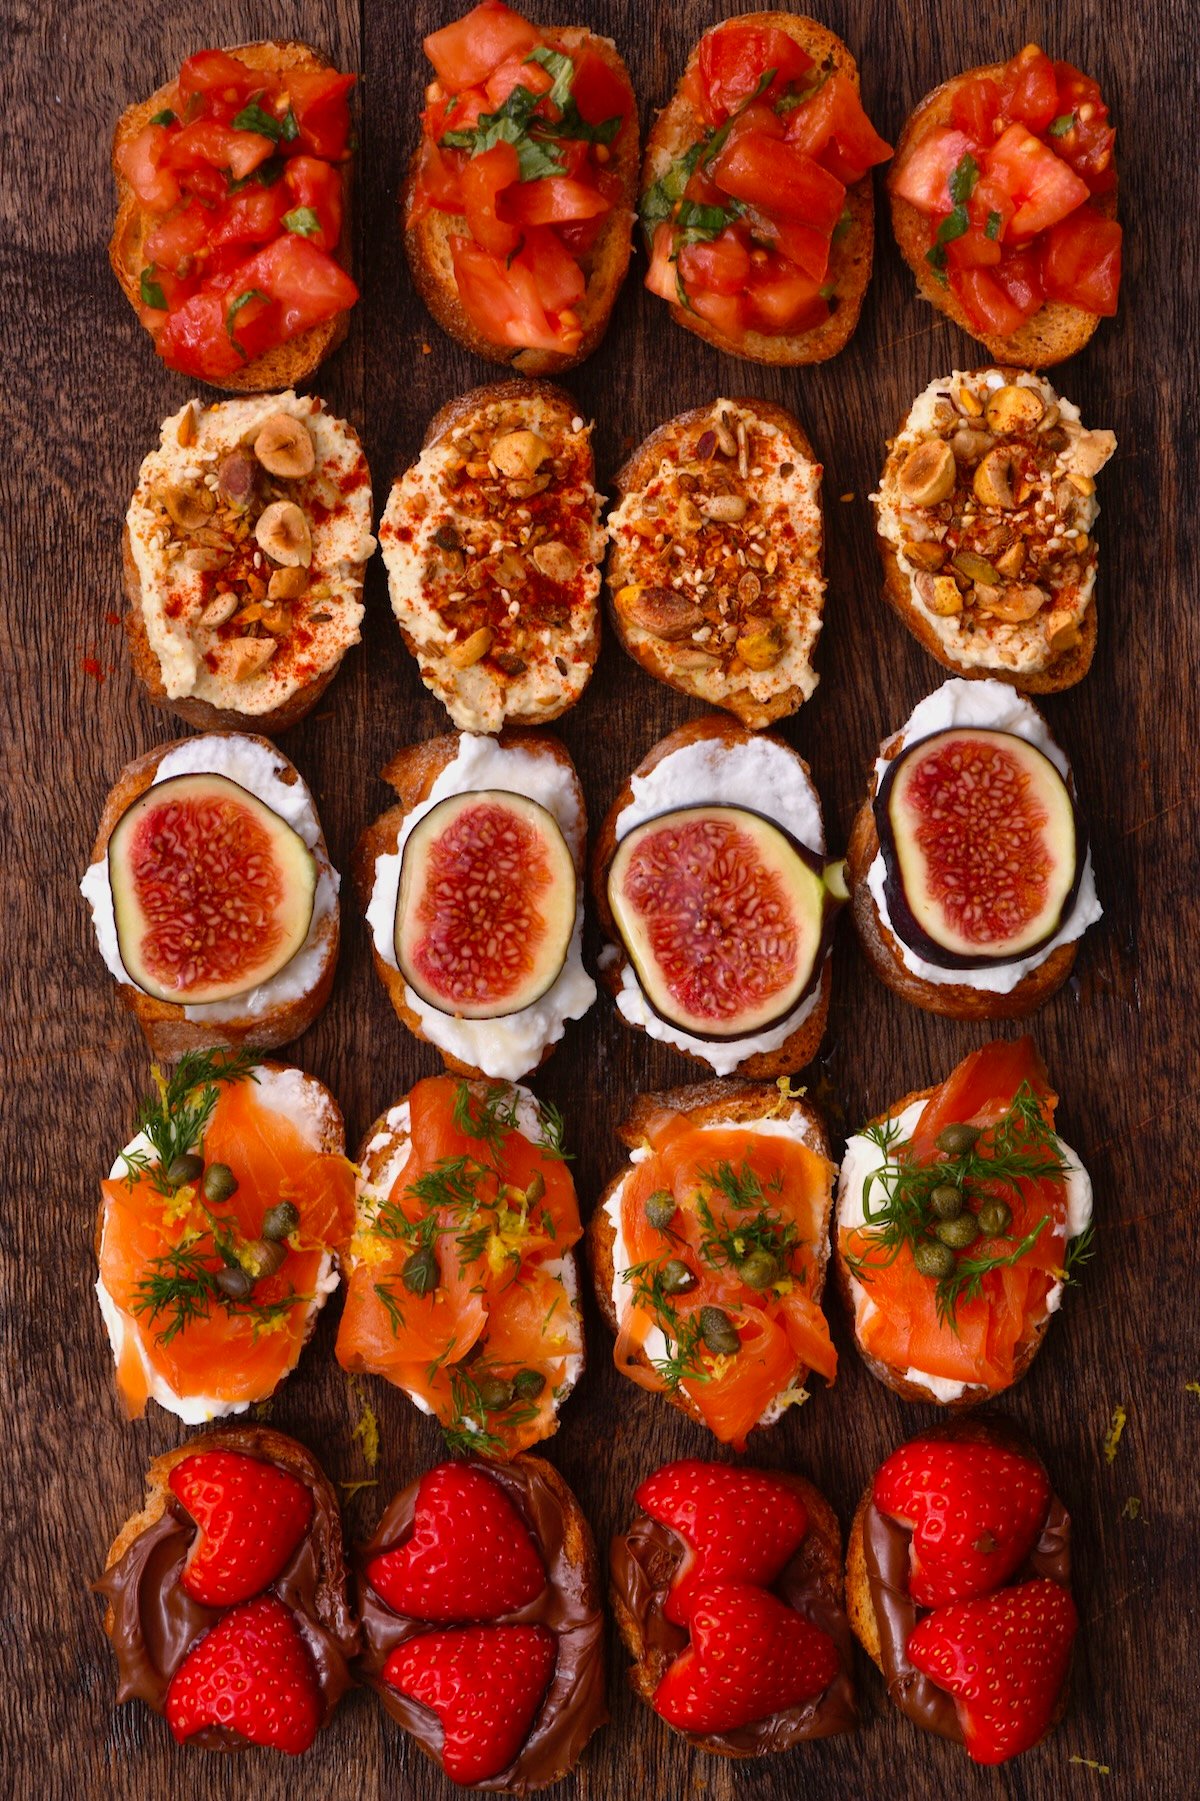 Homemade crostini with different toppings